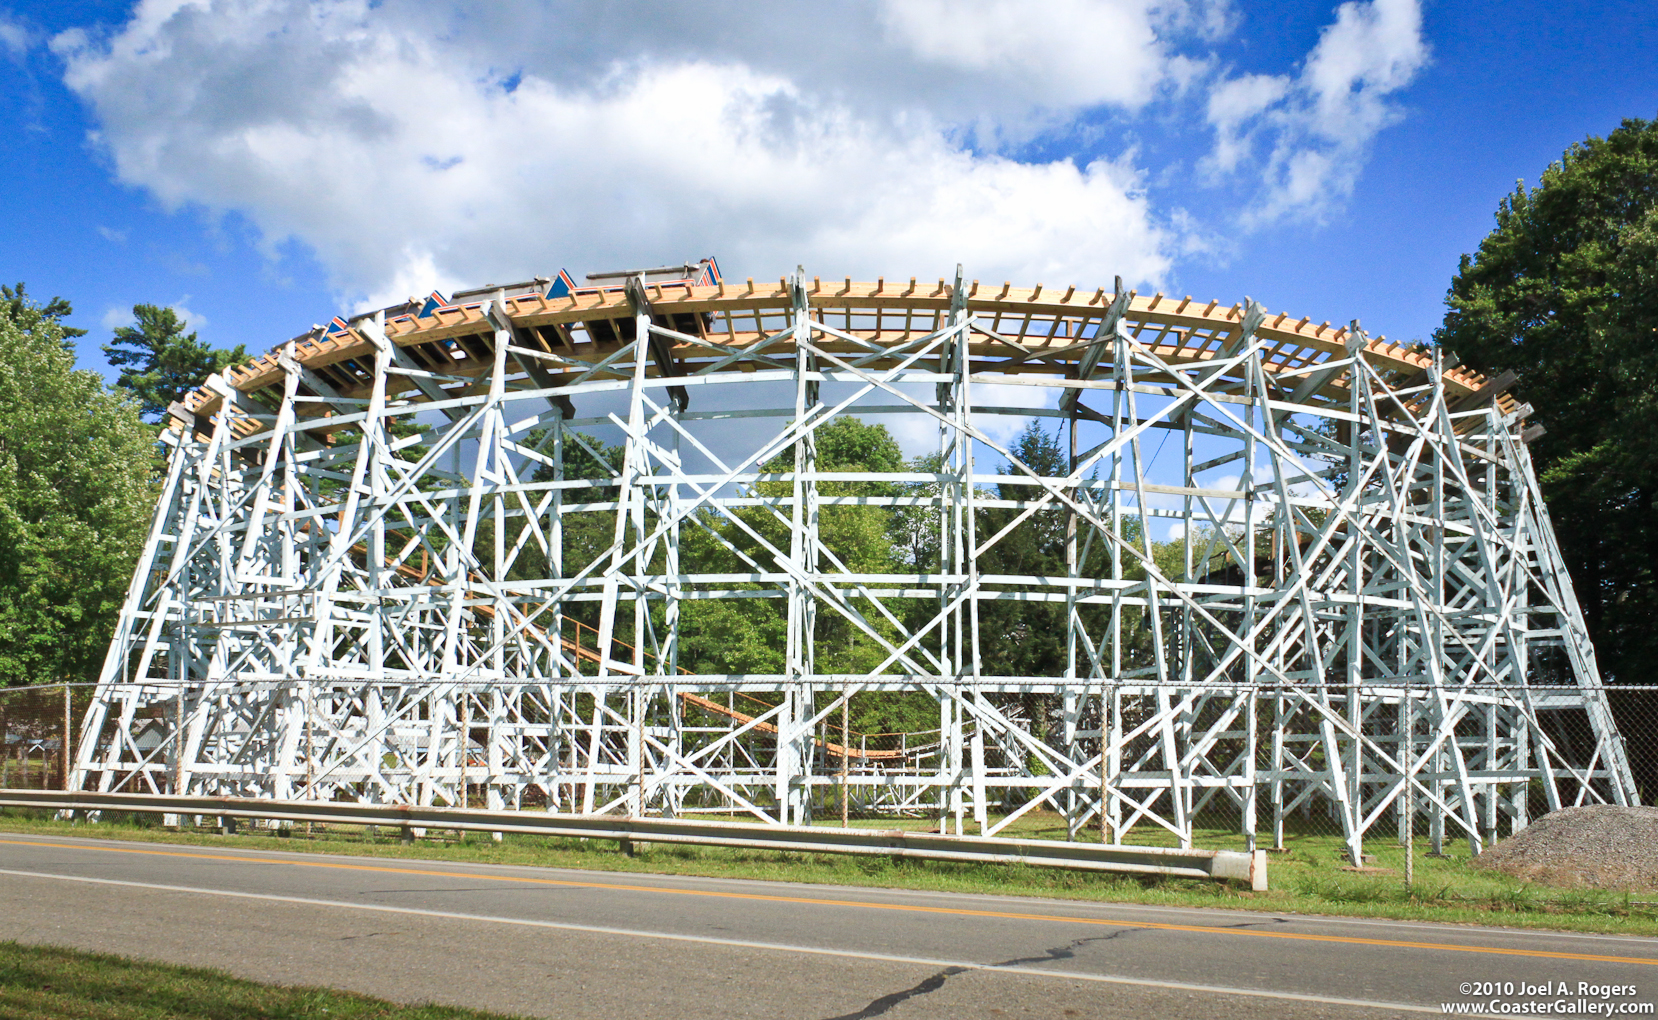 Roller coaster built by National Amusement Device (NAD) Company